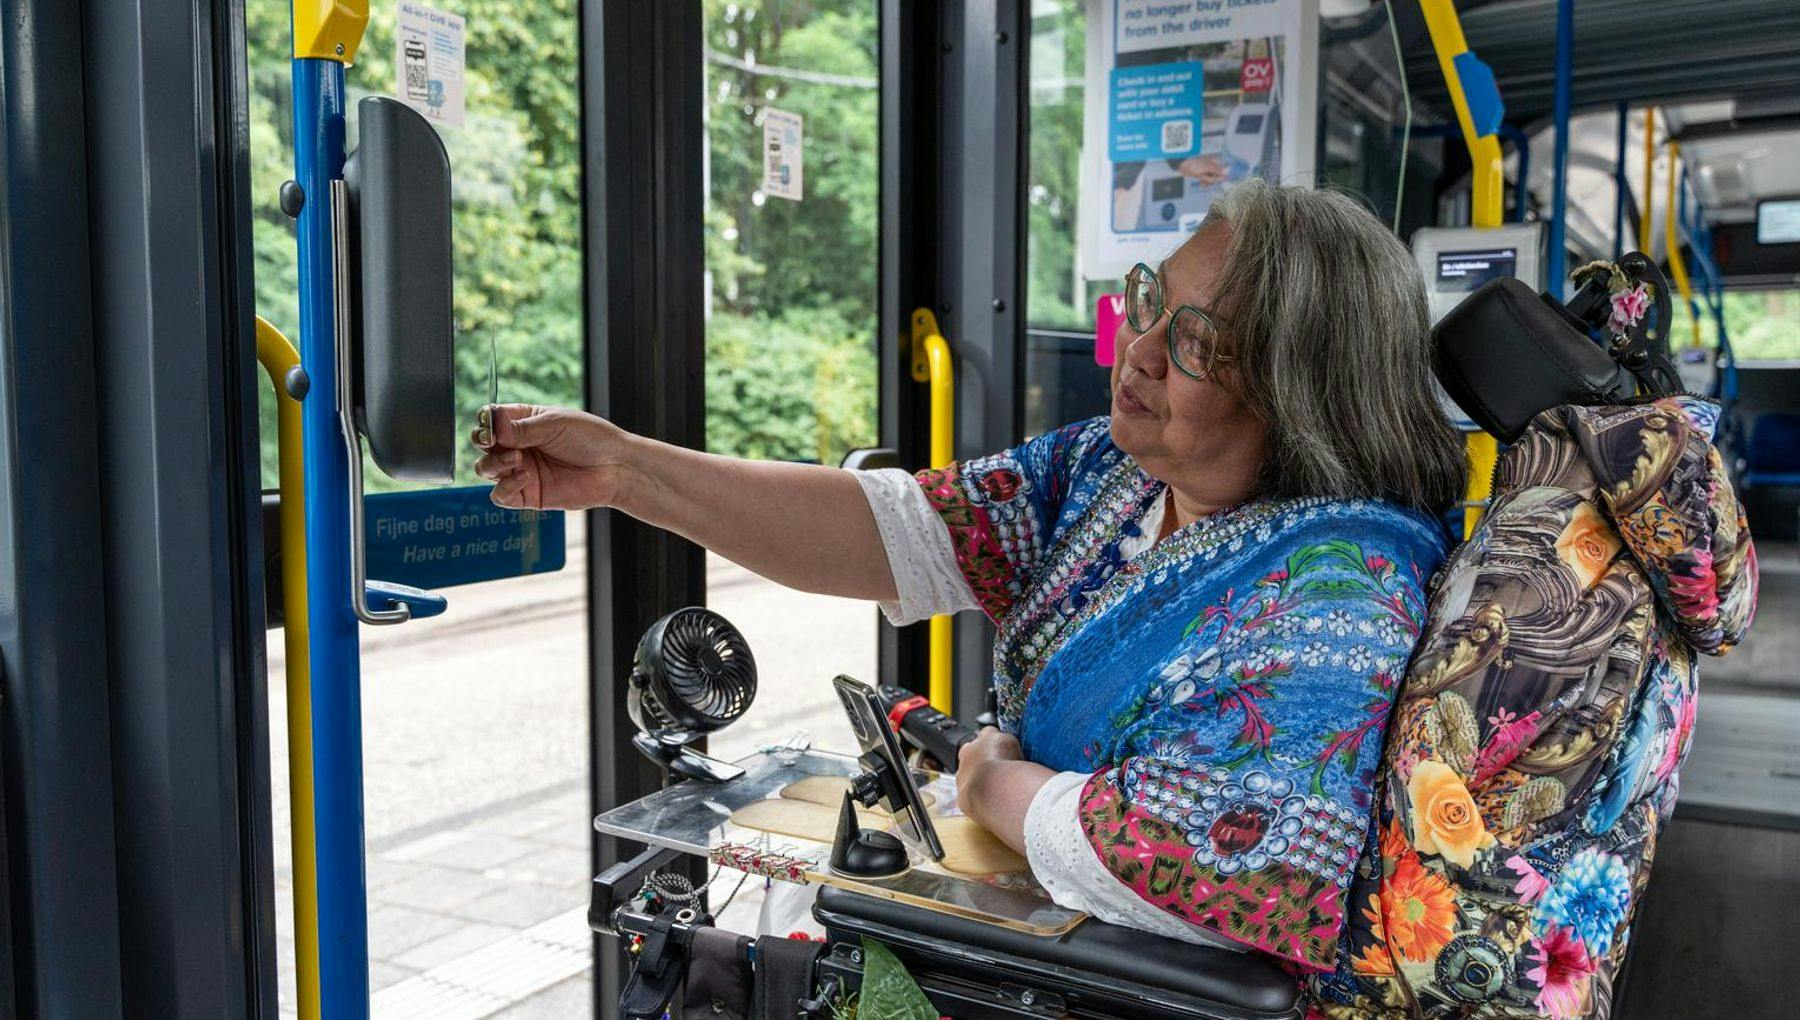 A person in an electric wheelchair in a bus checking-out.